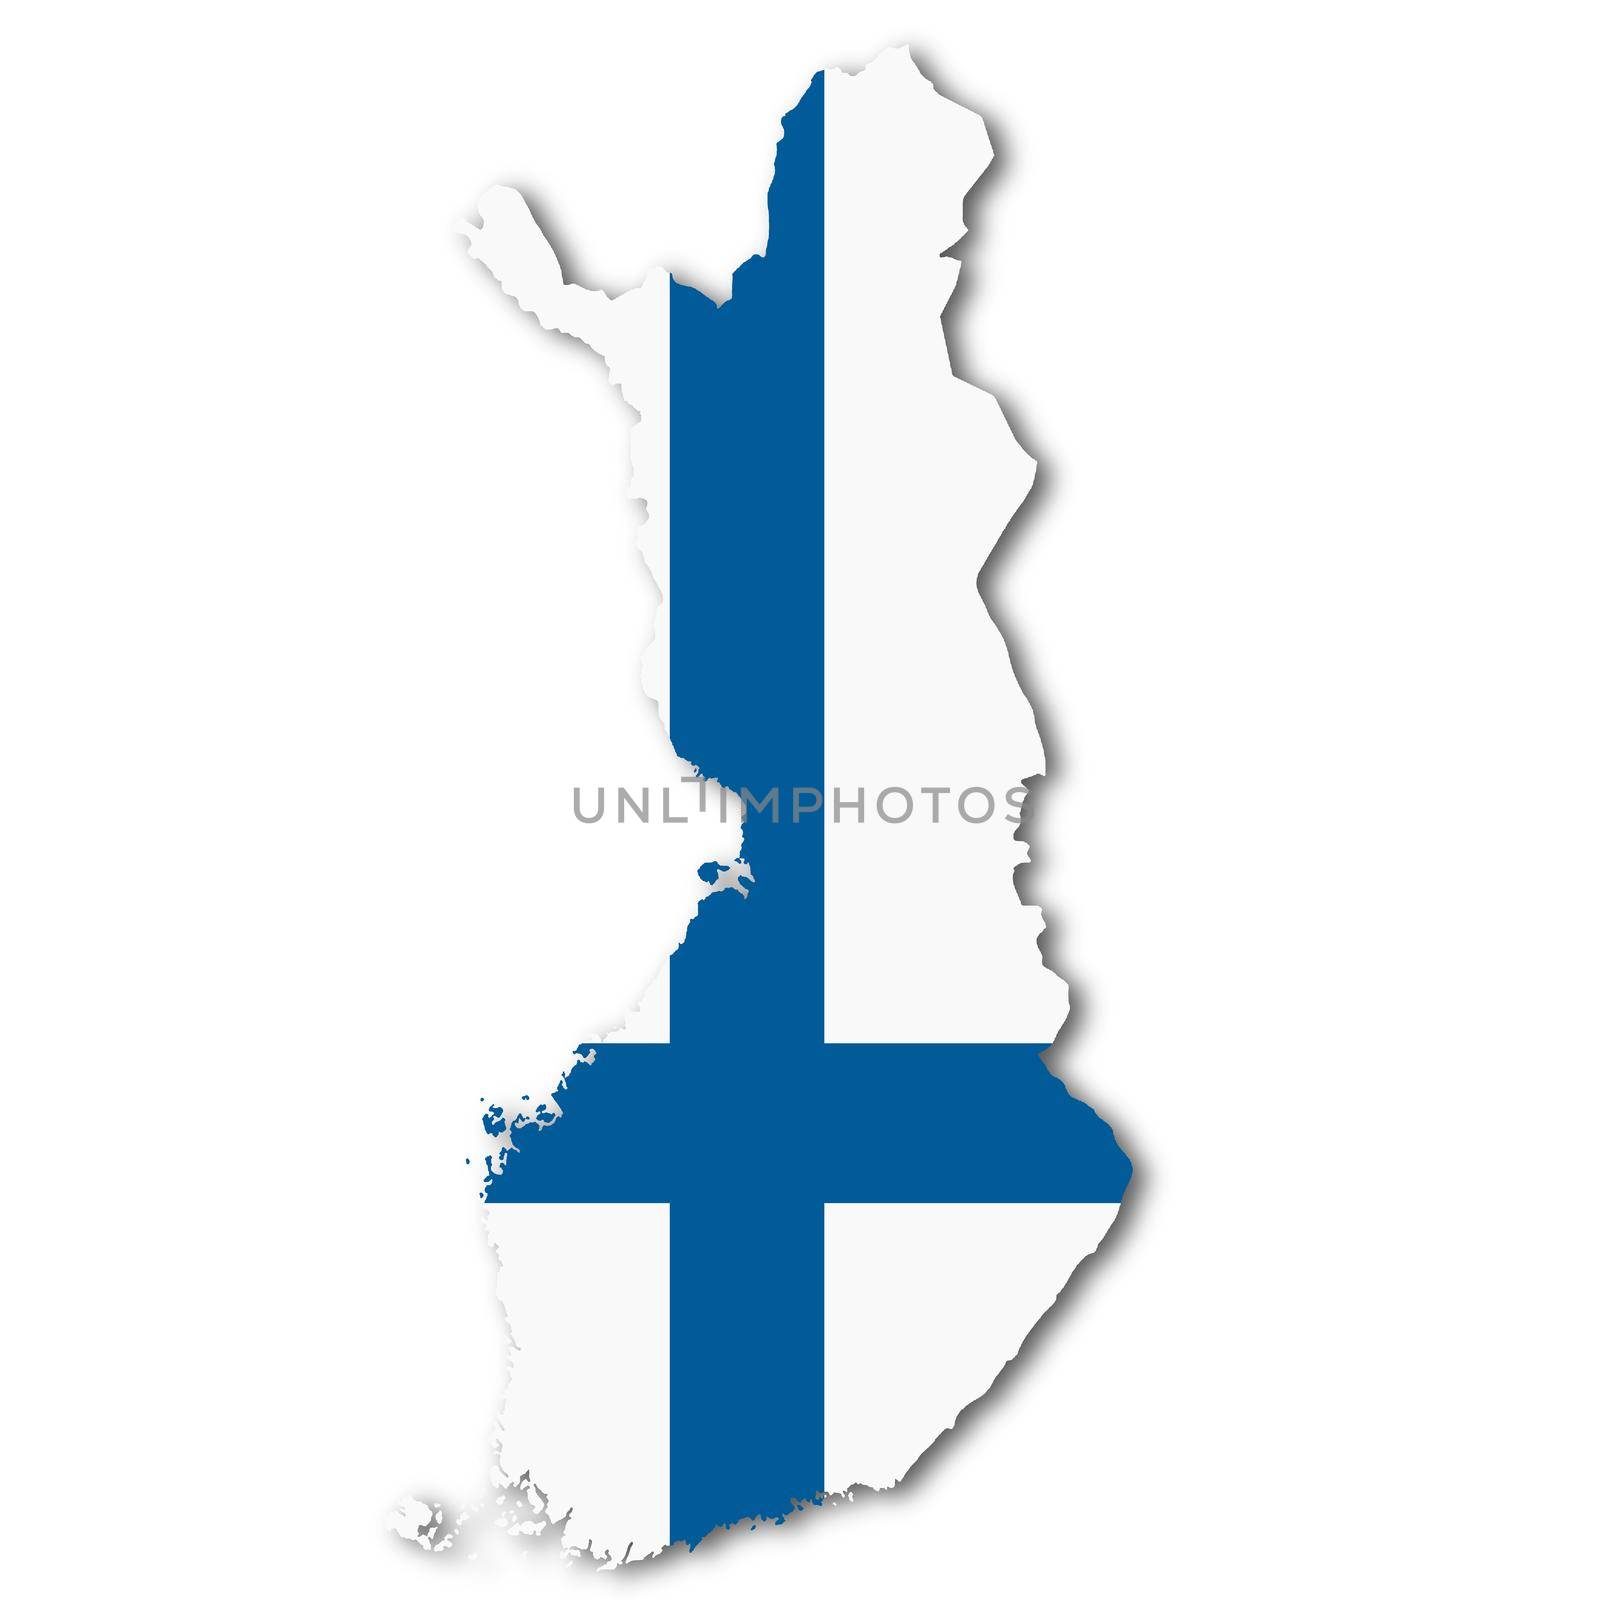 A Finland map on white background with clipping path to remove shadow 3d illustration